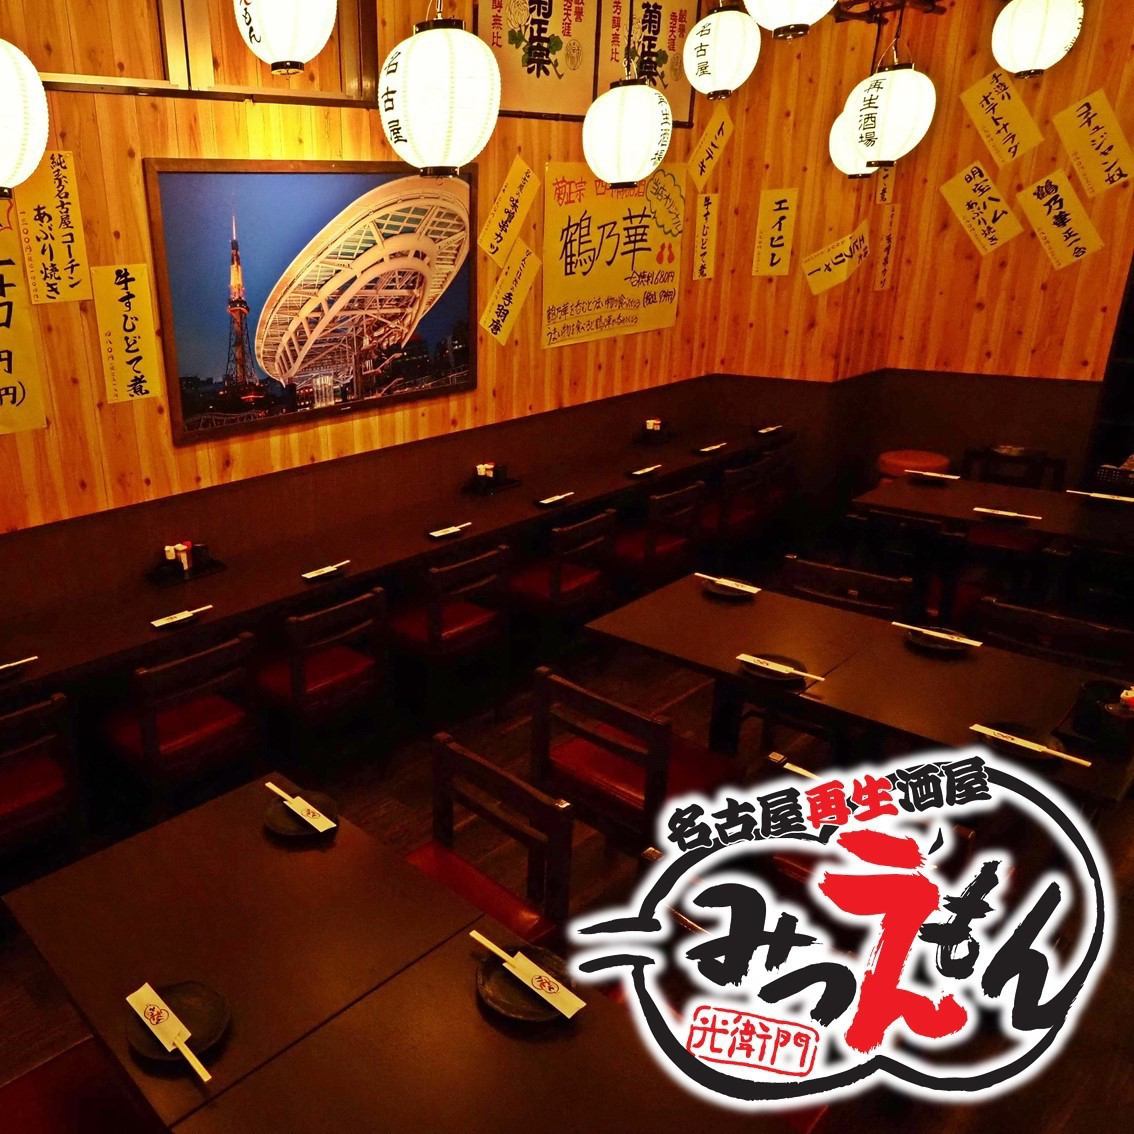 We have a lot of table seats, tatami mats, and counter seats!